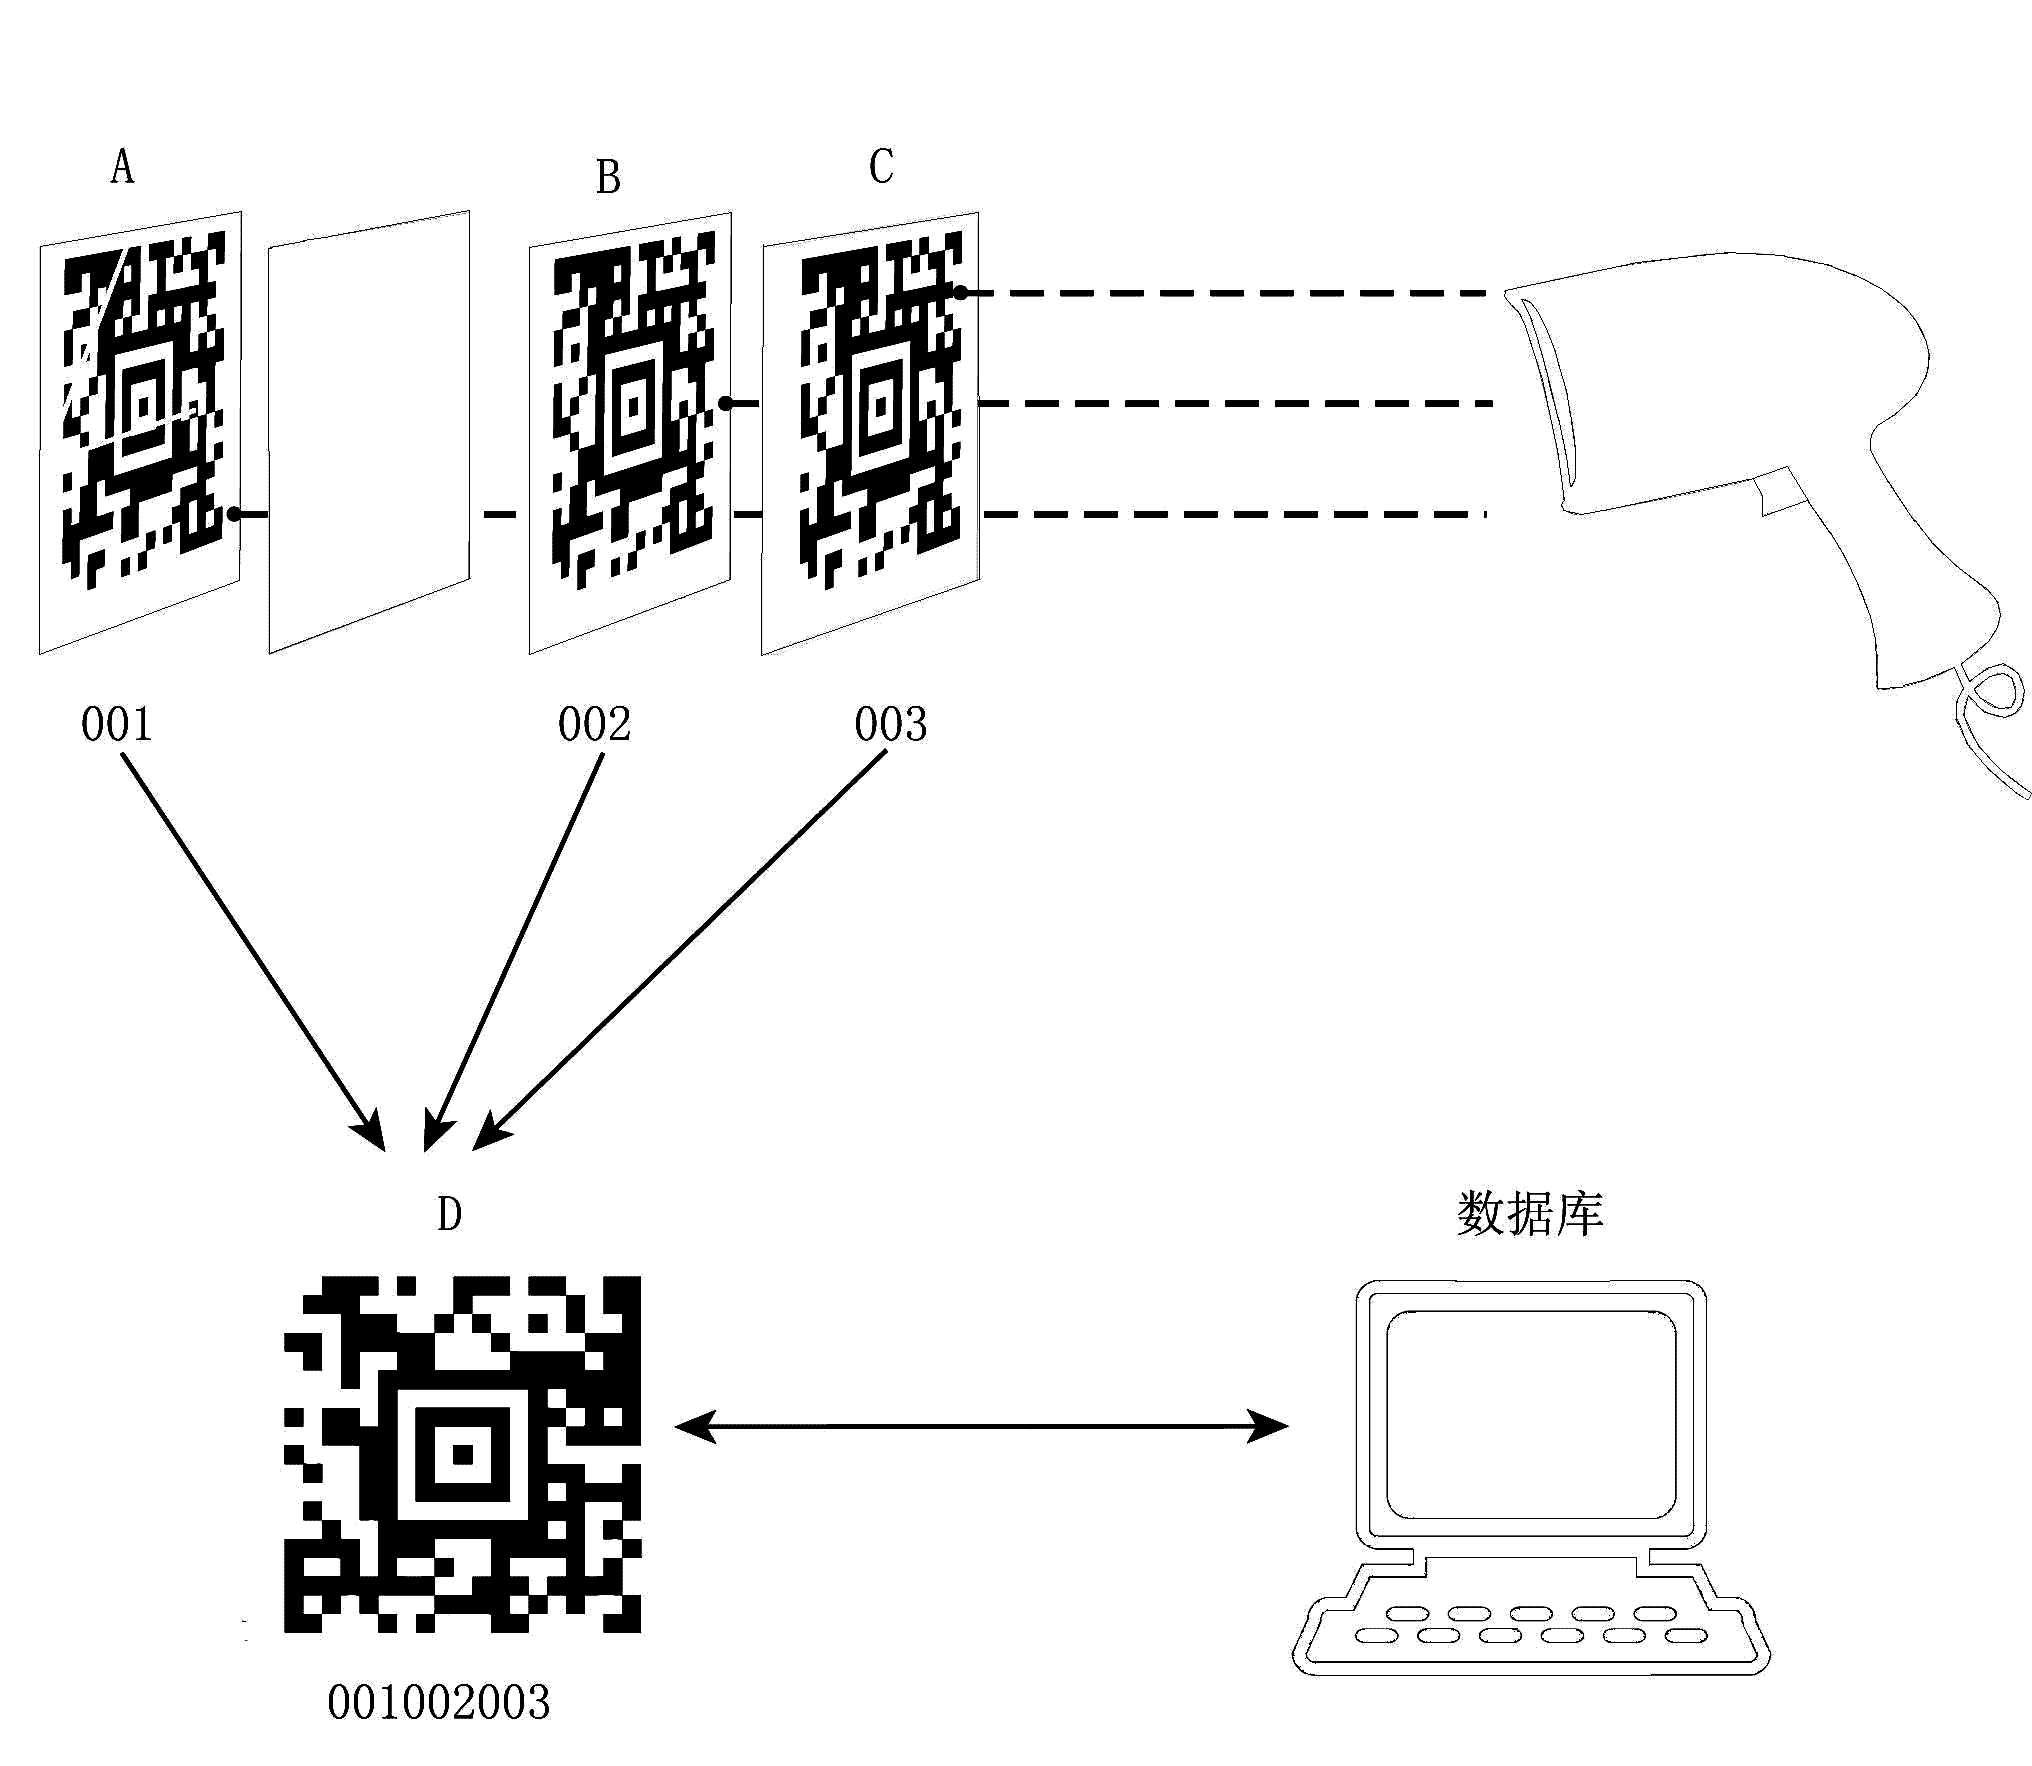 Anti-counterfeiting printing method by using invisible two-dimensional codes